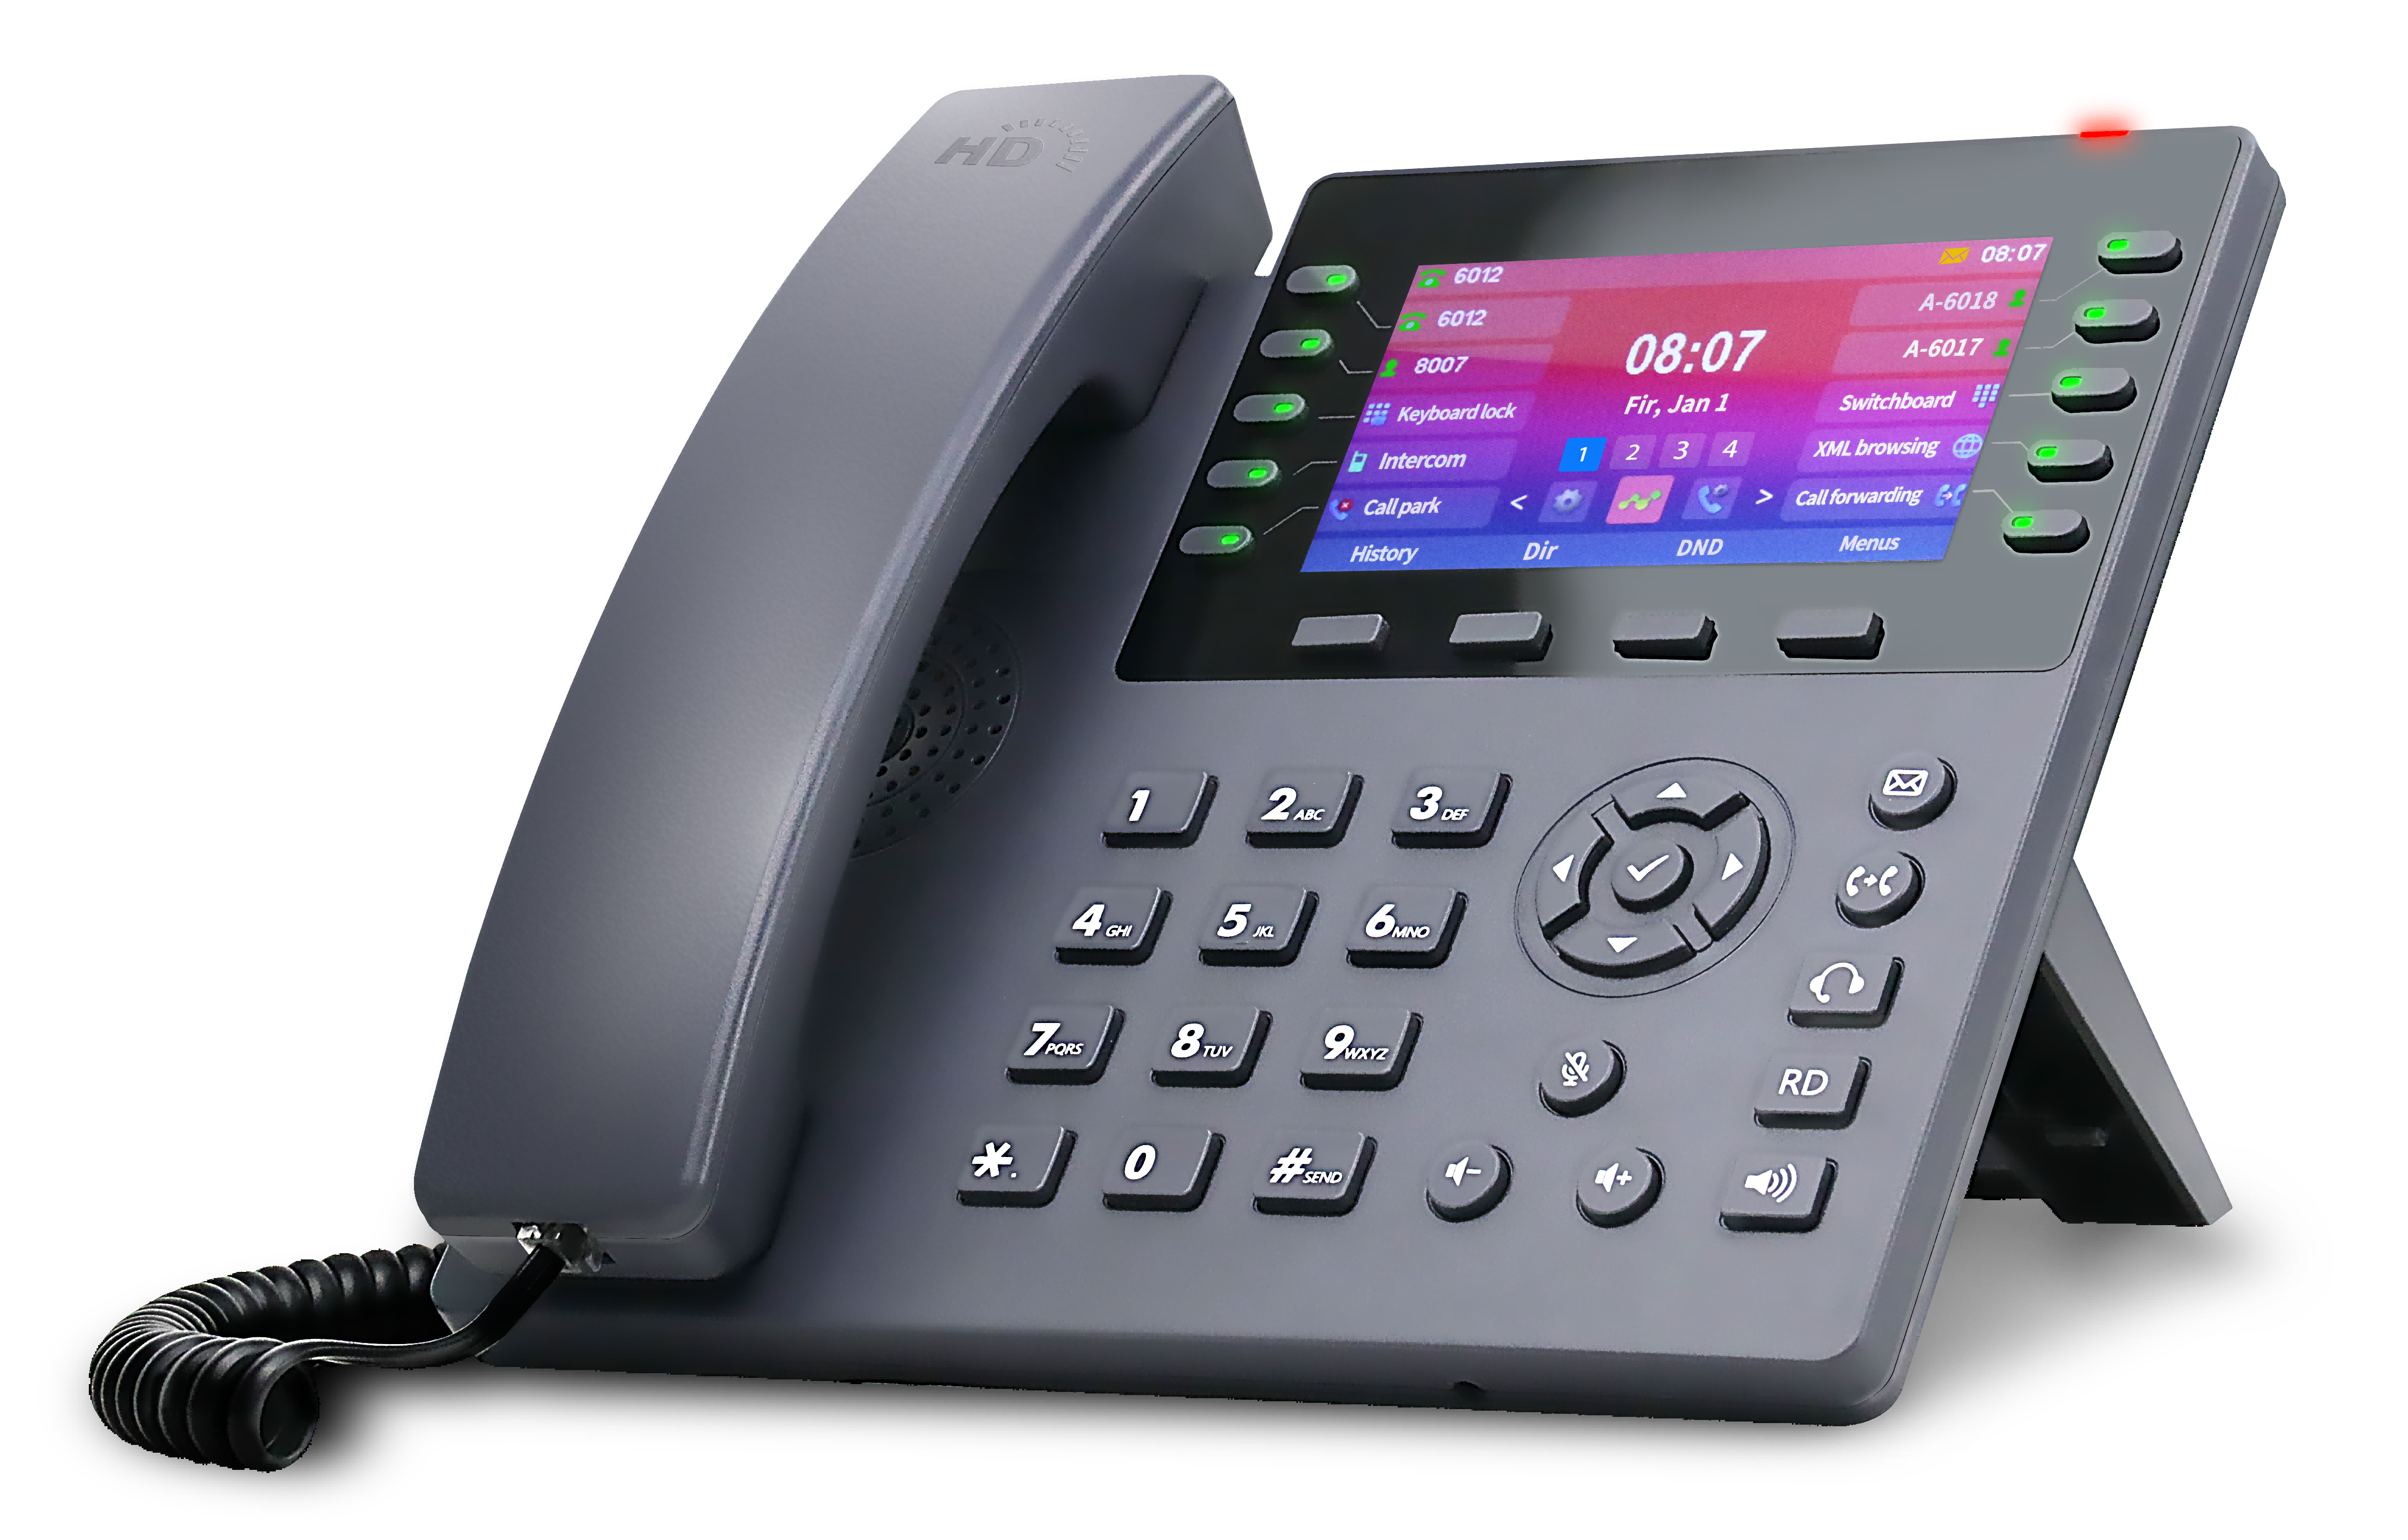 IP Phone SIP-840N support WiFi link and is compatible with mainstream IP and PBX